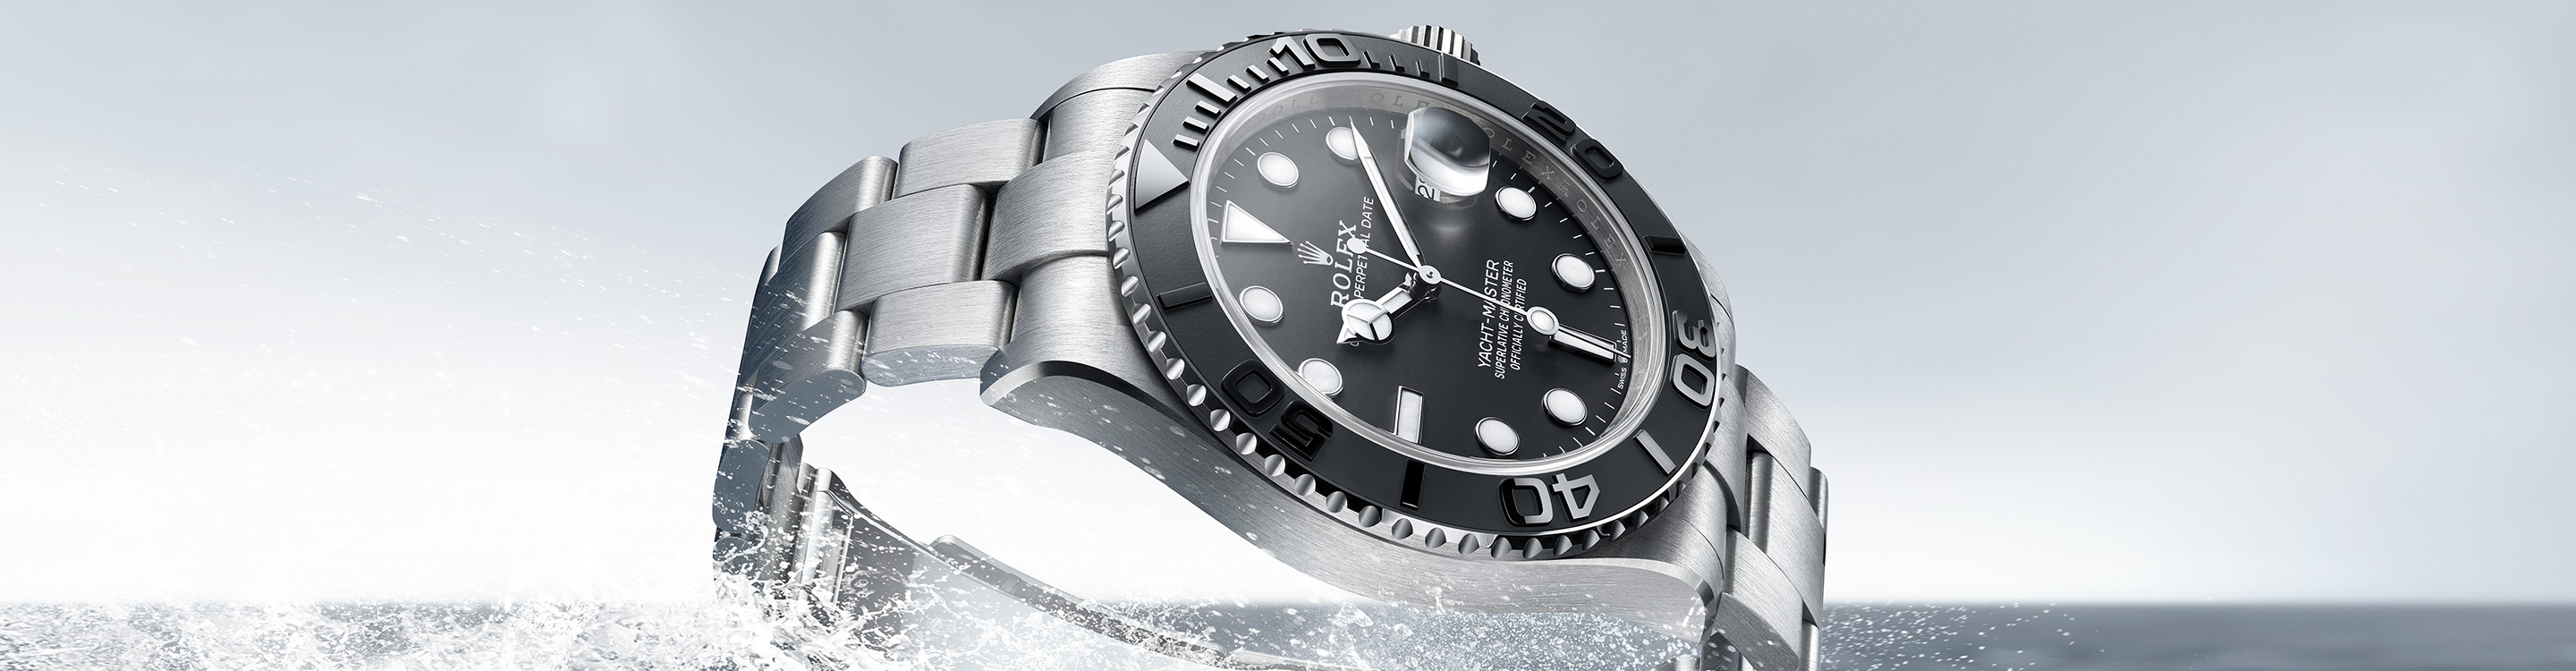 Rolex Yacht Master silver watch with black dial in water